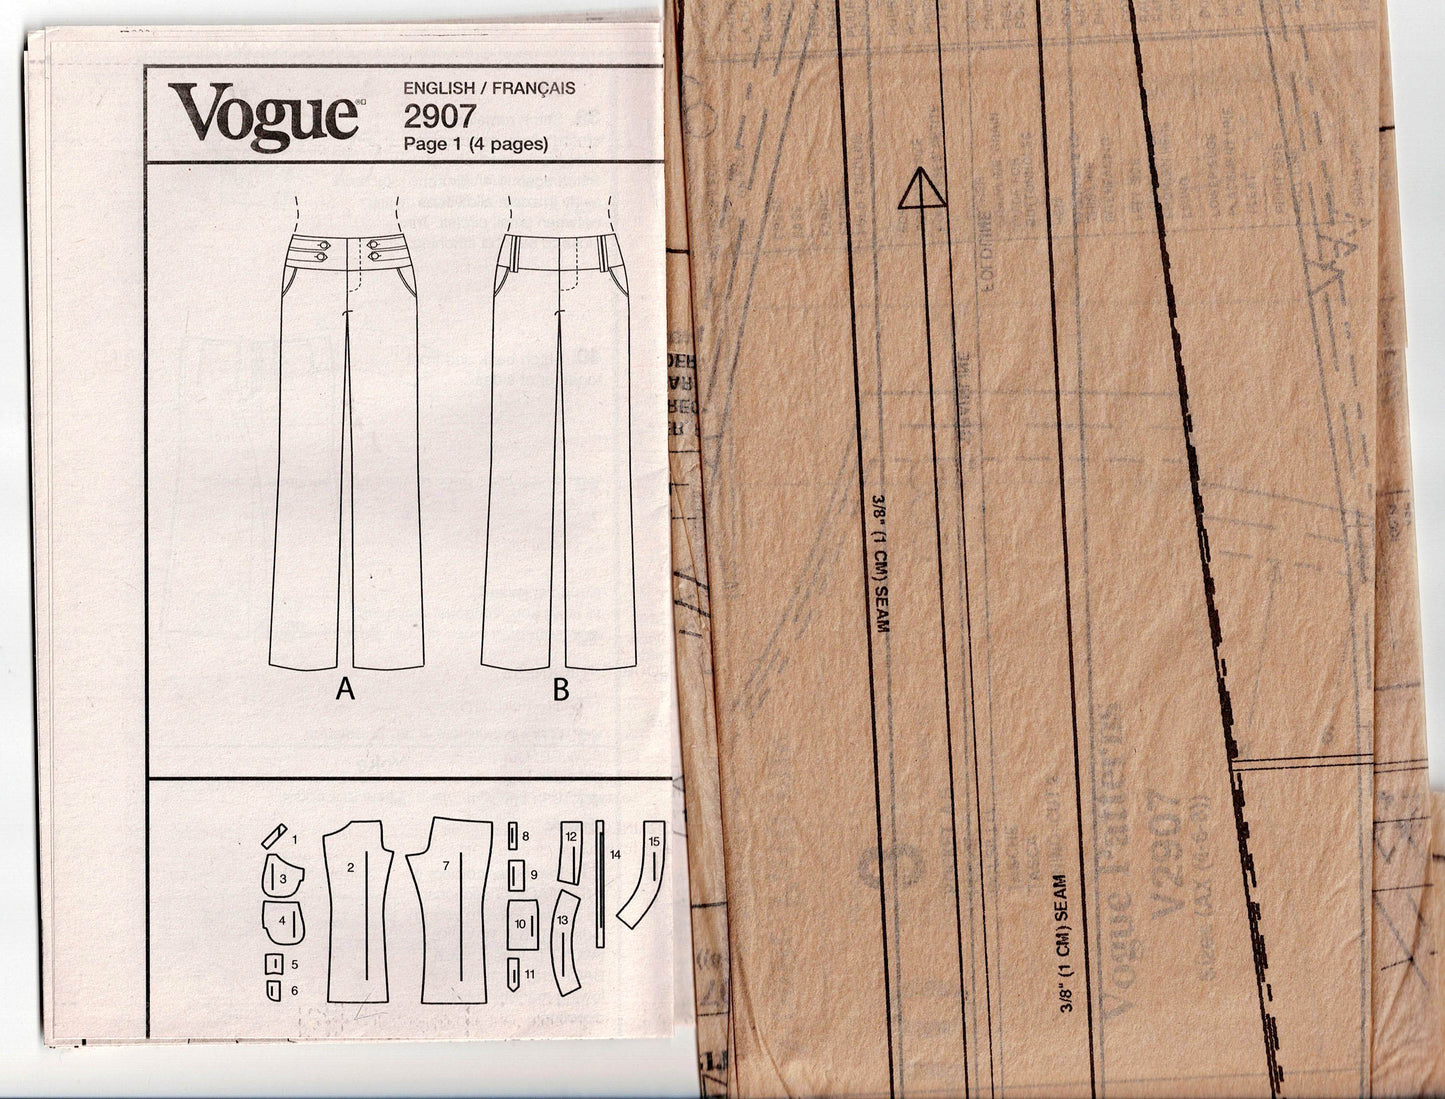 Vogue American Designer V2907 ALICE + OLIVIA Womens Low Rise Hipster Flared Pants Out Of Print Sewing Pattern Size 4 - 8 or 10 - 14 UNCUT Factory Folded